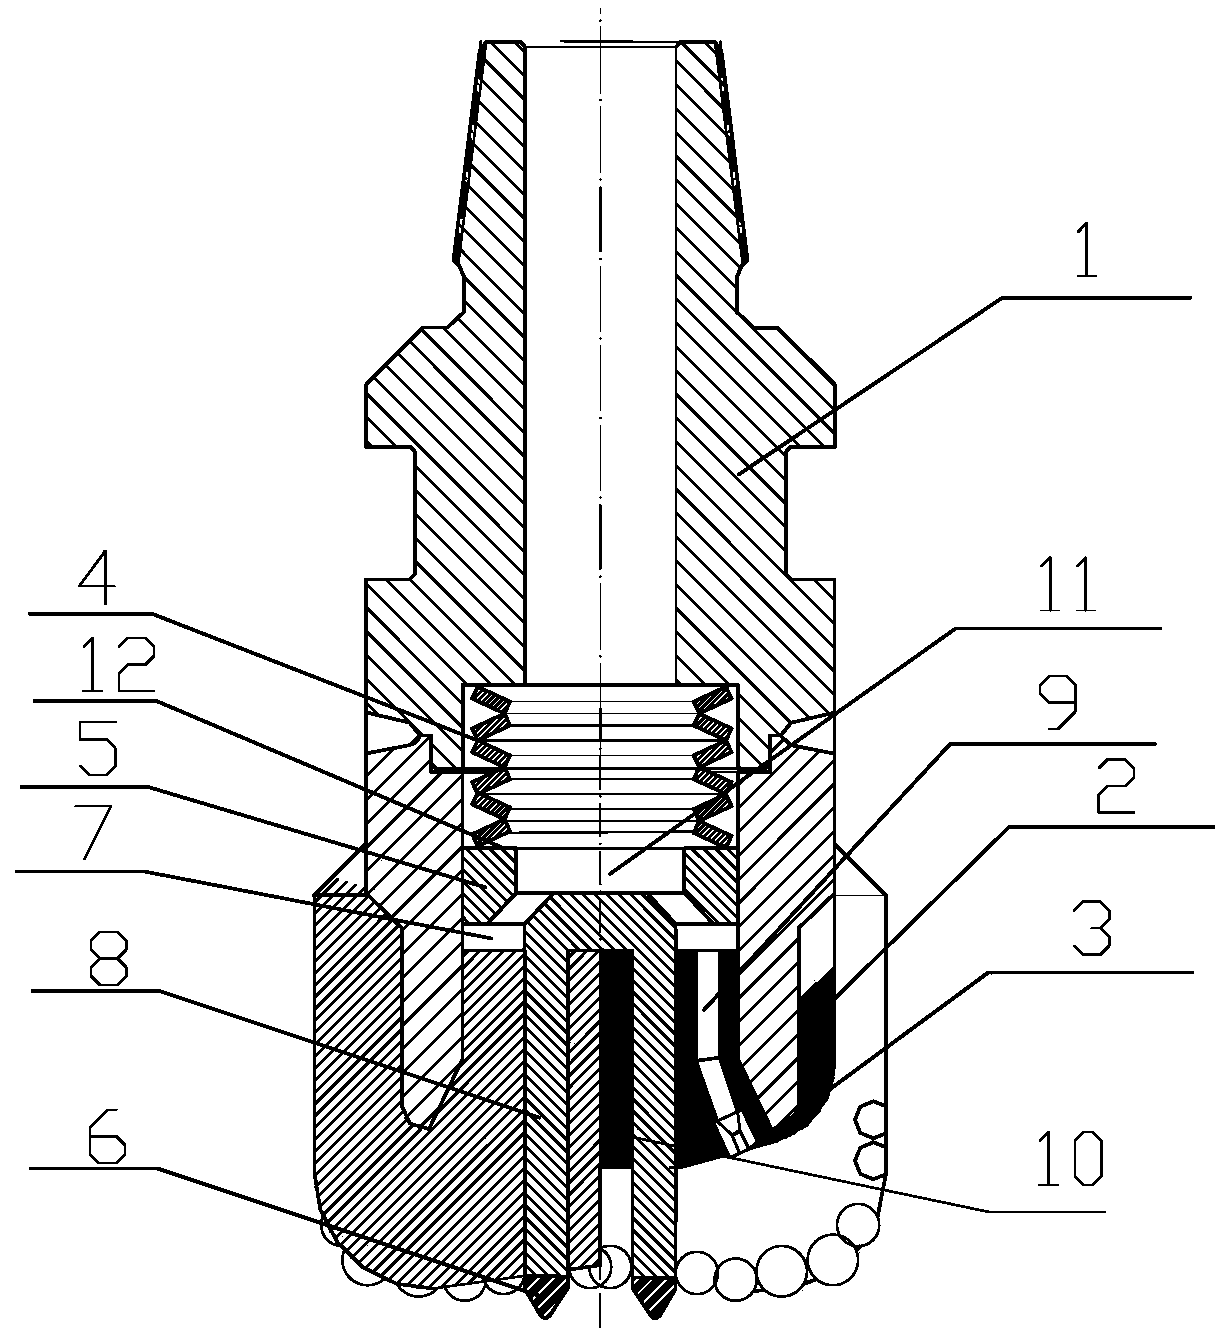 Drill bit with energy-gathered attack to unload well bottom stress and drilling method